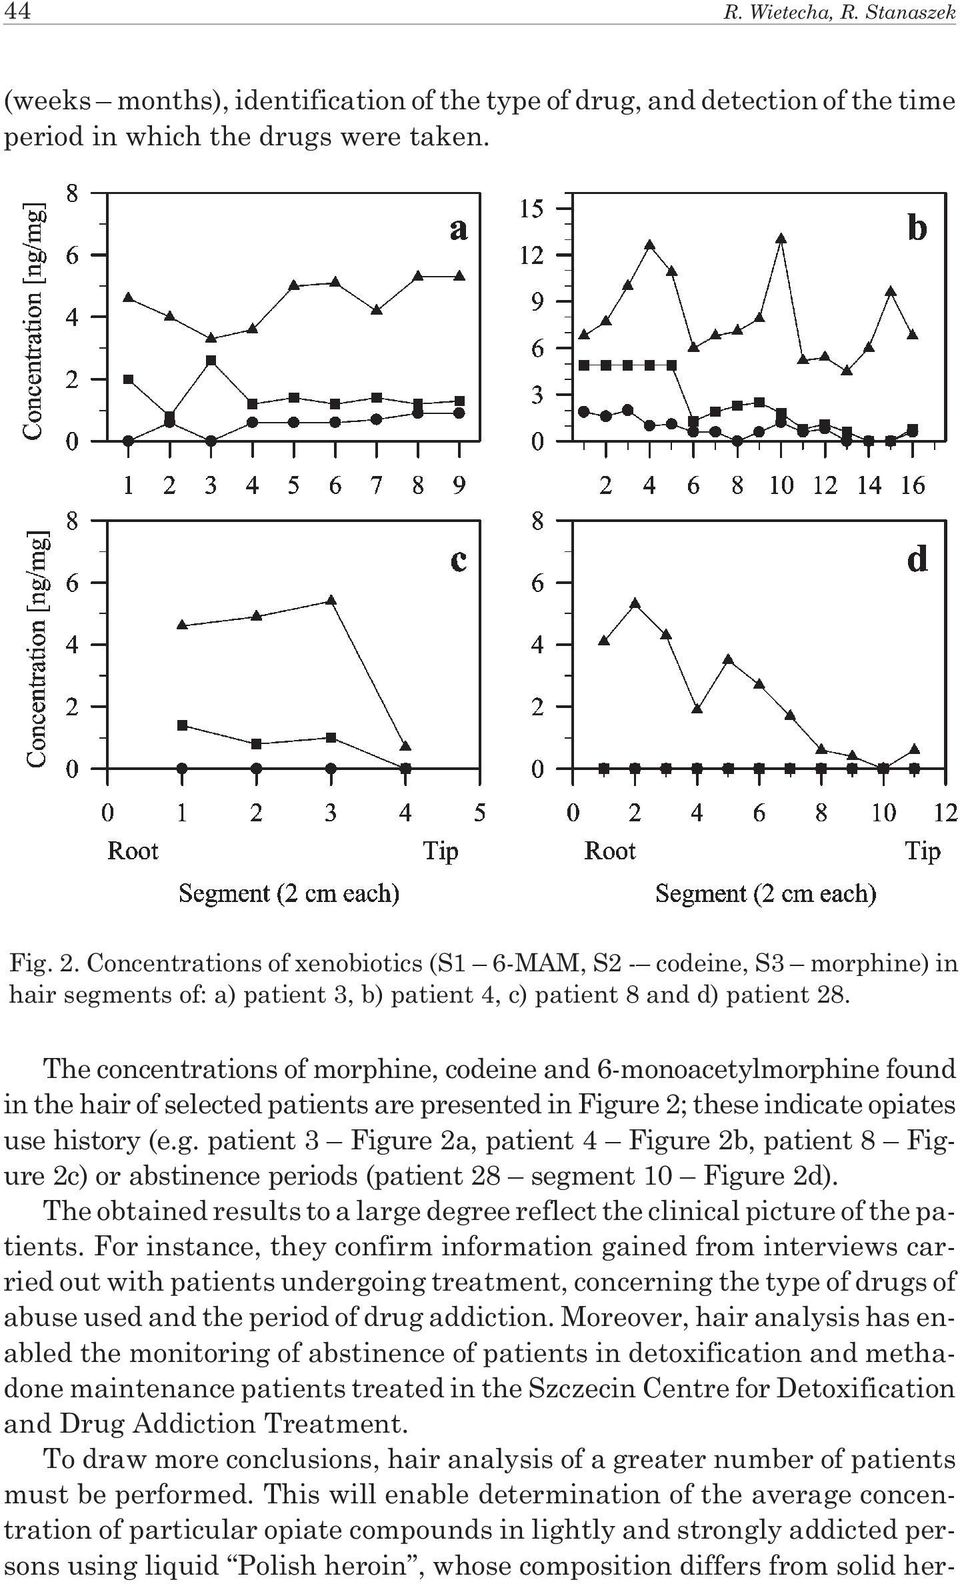 The concentrations of morphine, codeine and 6-monoacetylmorphine found in the hair of selected patients are presented in Figu